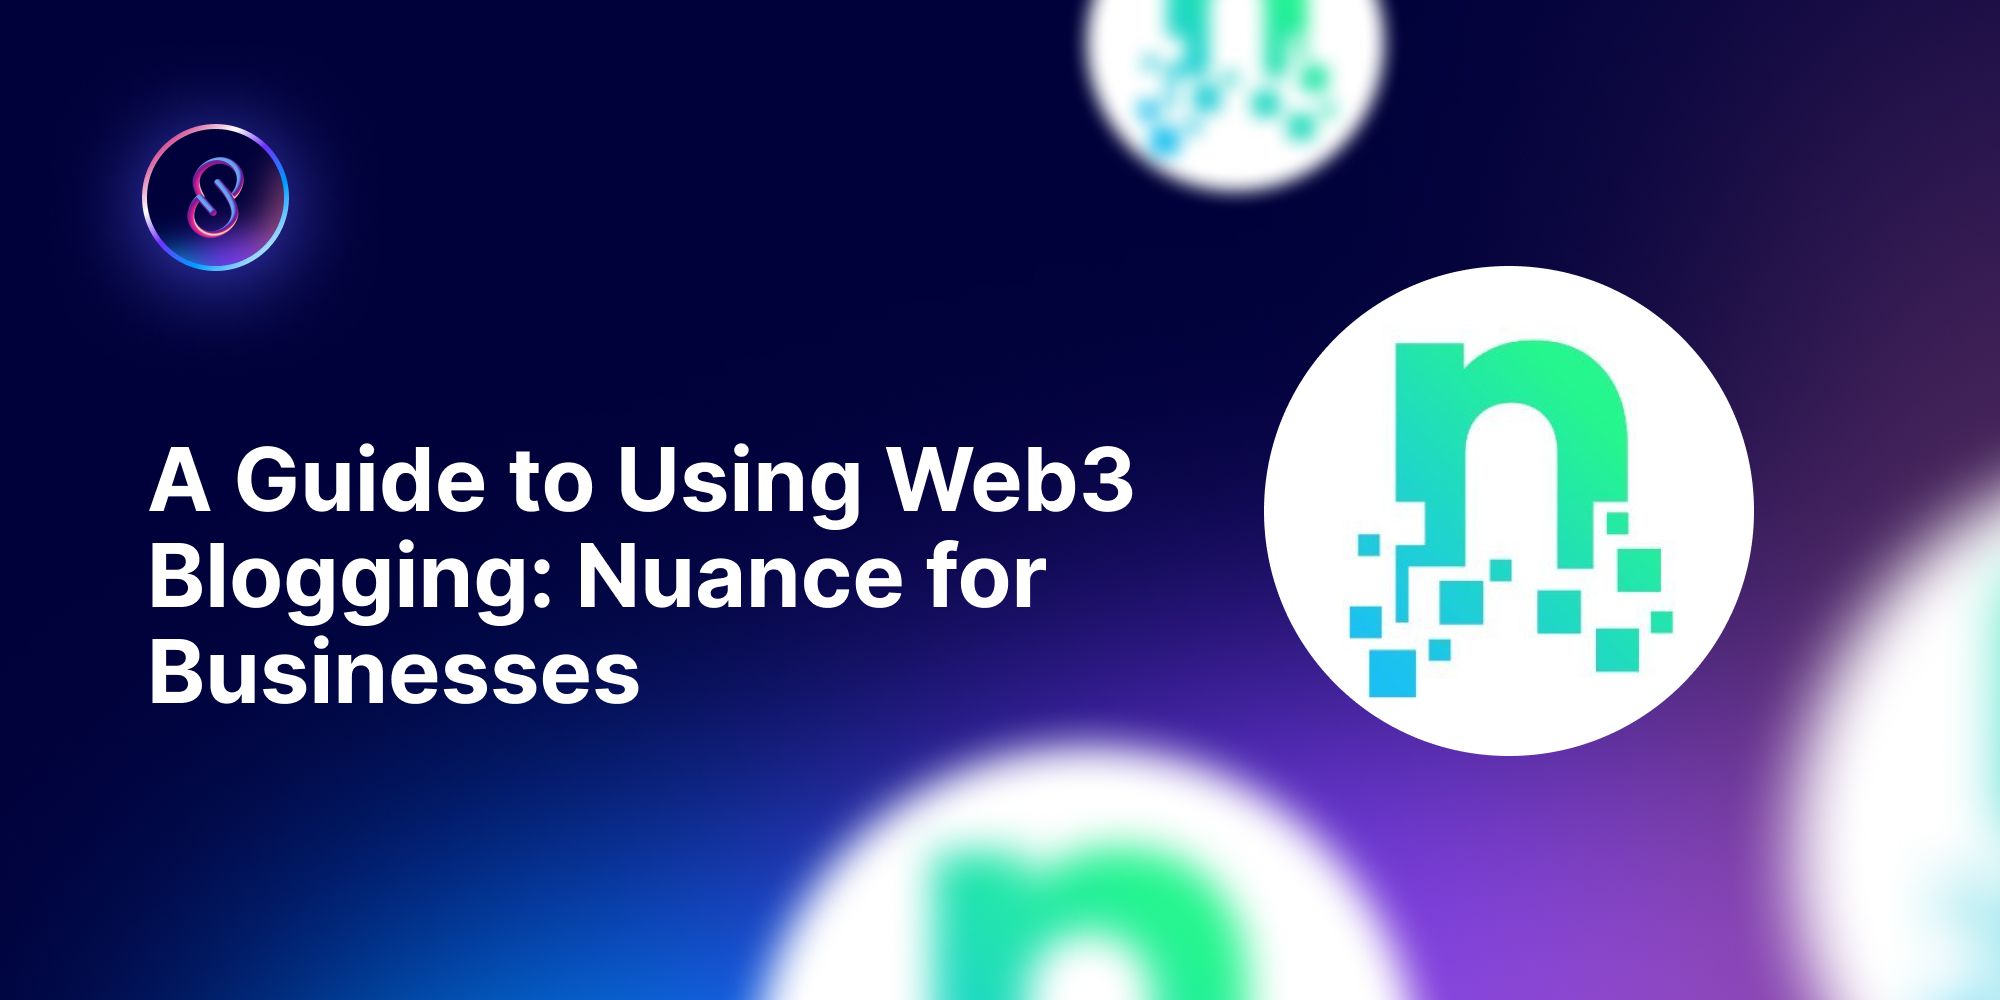 A Guide to Using Web3 Blogging: Nuance for Businesses